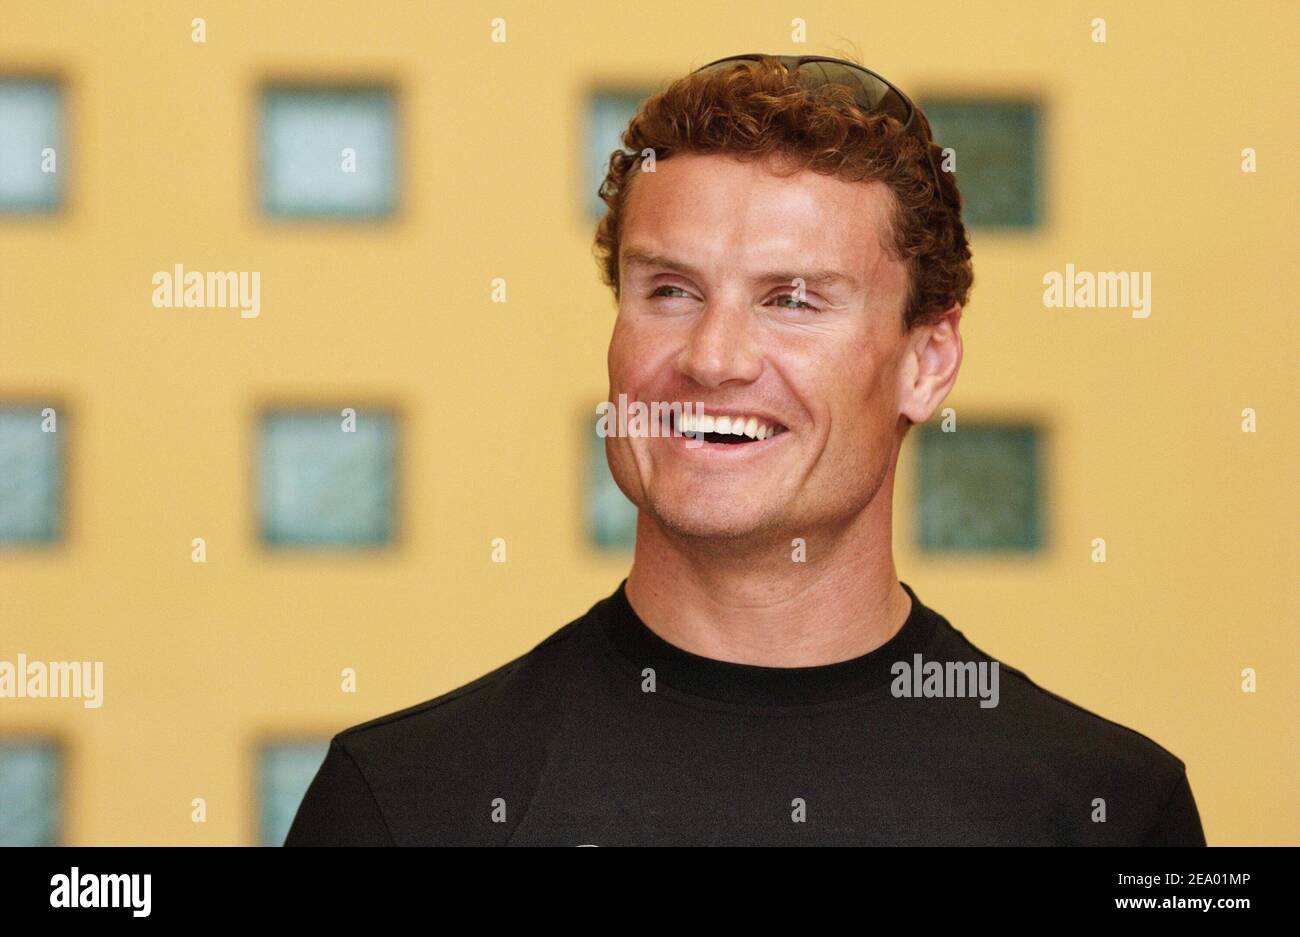 U.K Formula 1 driver David Coulthard ( MC Laren team) in Monaco, Monte Carlo, on May 23, 2004. Photo by Thierry Gromik/ABACA. Stock Photo